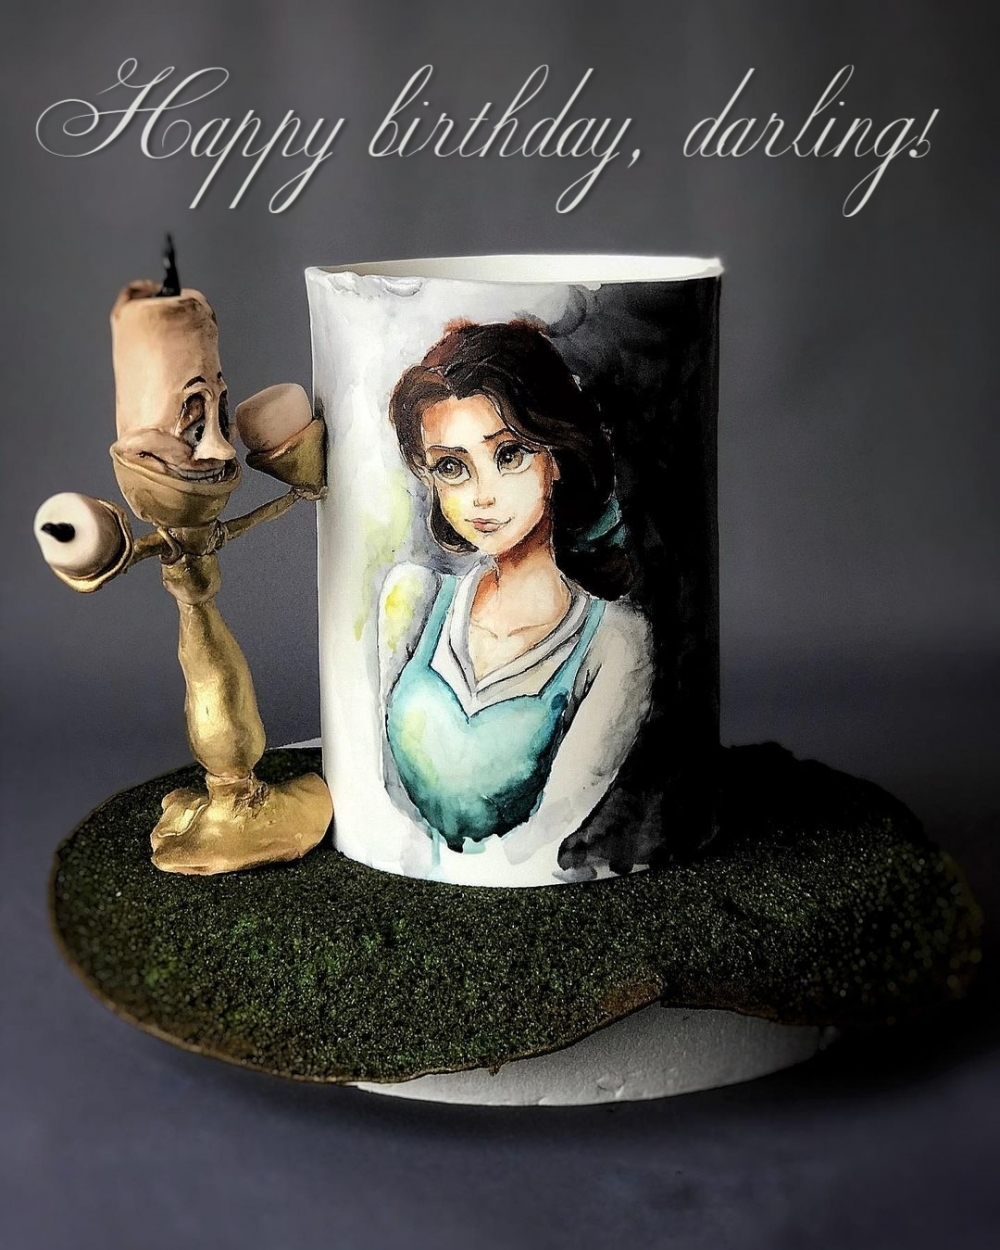 Picture: Sending loving wishes to the birthday girl today.